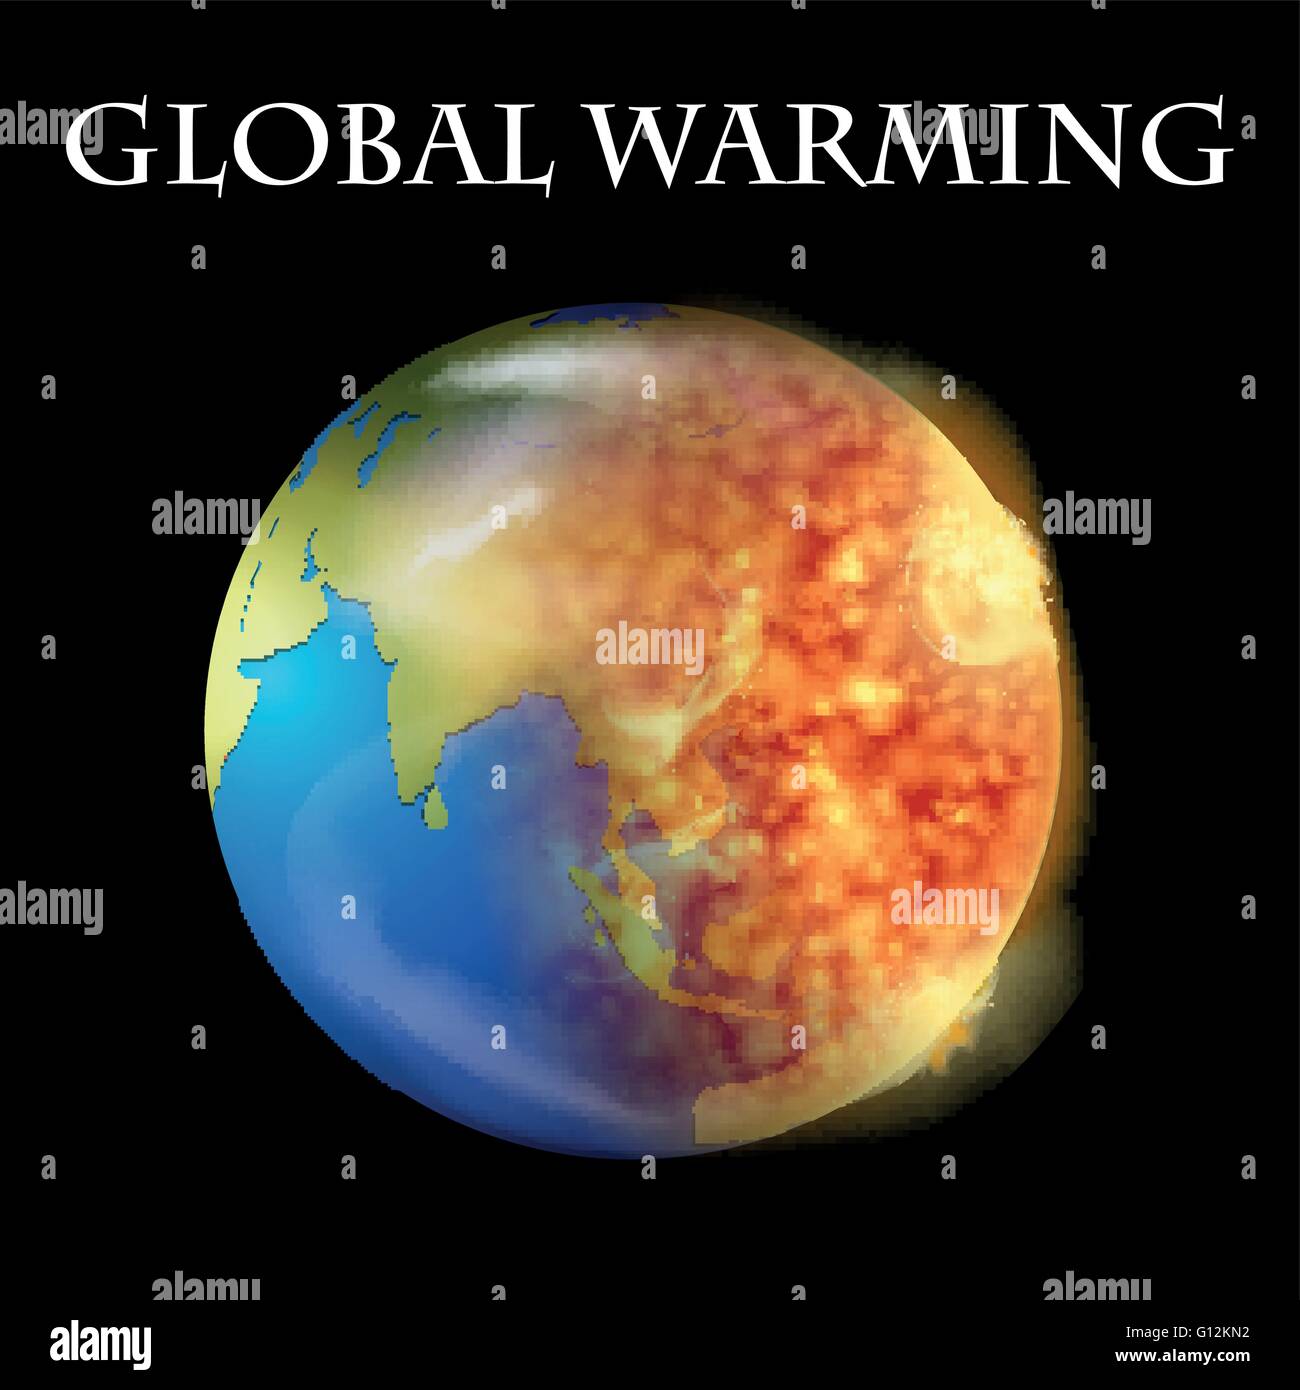 Global warming theme with earth on fire illustration Stock Vector